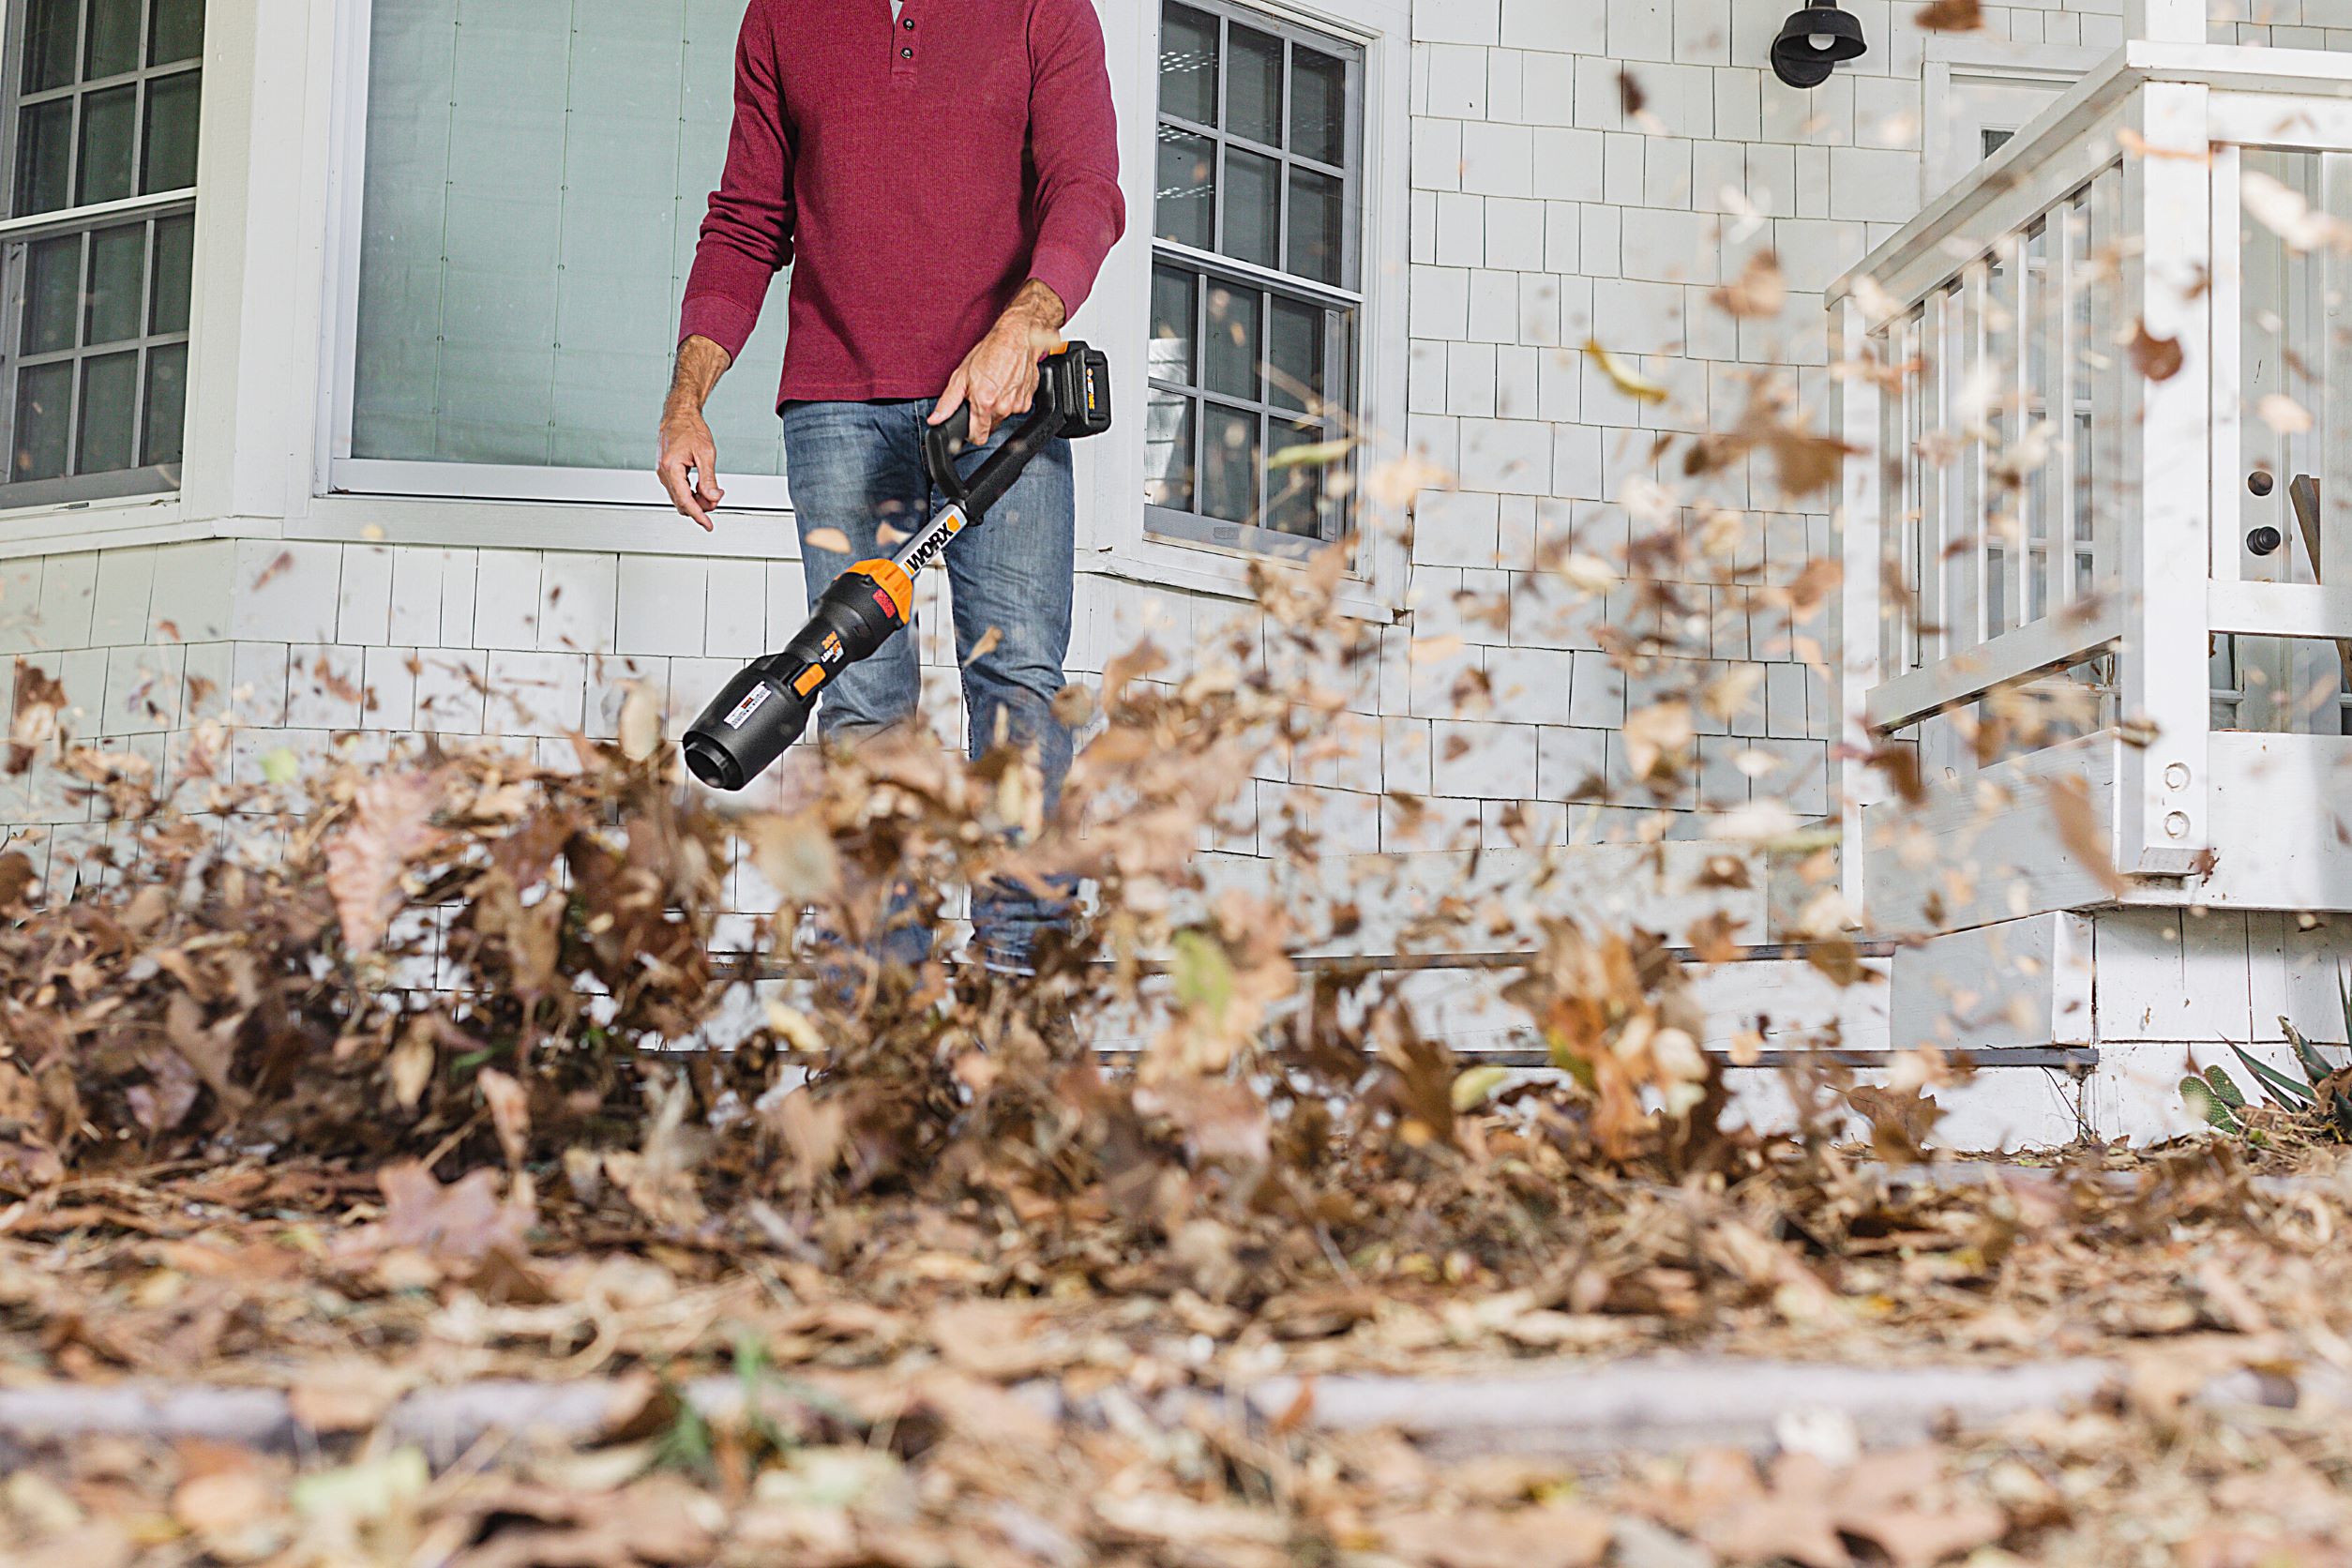 WORX 20V Leafjet Blower instantly switches between high air speed and volume, depending on the job at hand.